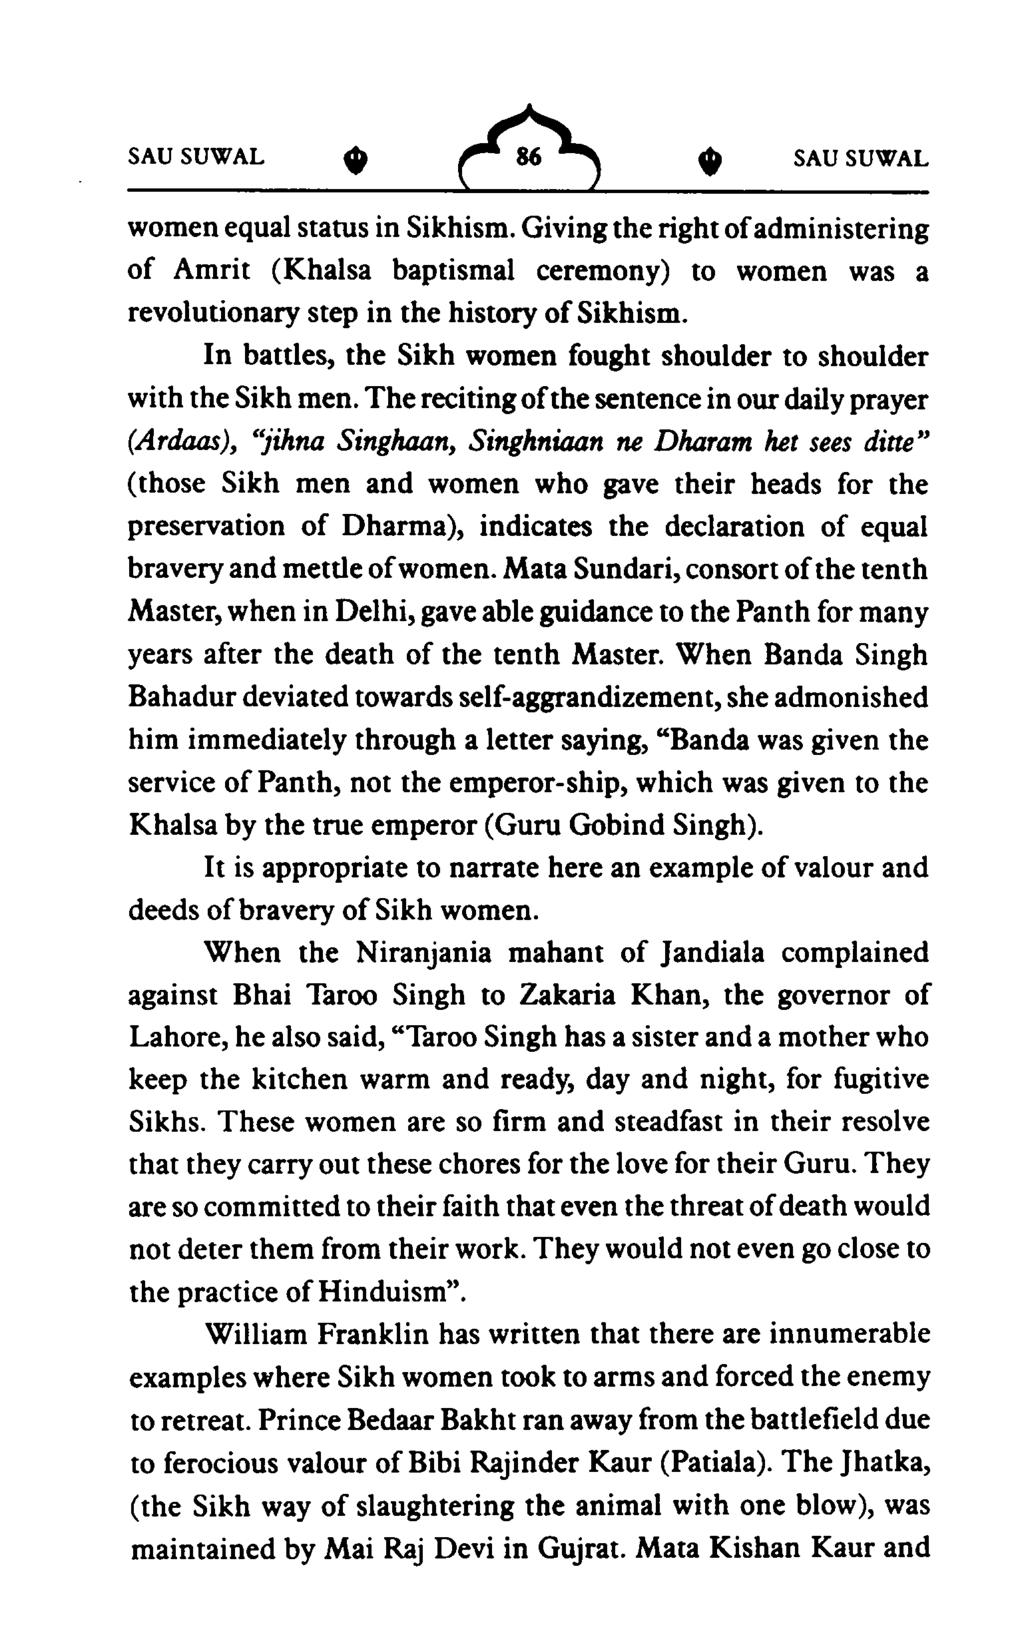 women equal status in Sikhism. Giving the right ofadministering of Amrit (Khalsa baptismal ceremony) to women was a revolutionary step in the history ofsikhism.